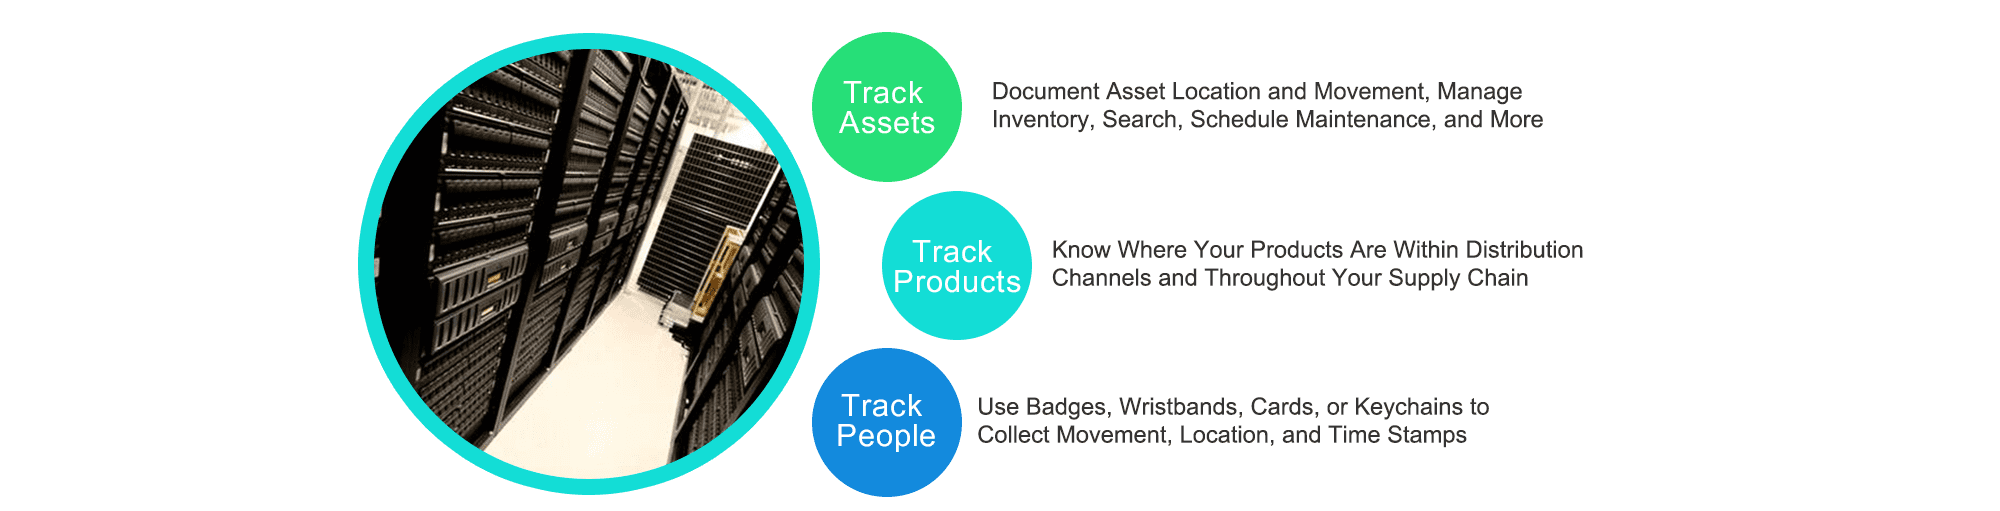 RFID Asset Tracking and Management Solutions, RFID Asset Trackings, Biometric Dealers In Hyderabad | Automatic electric Gates In Hyderabad | Access Control Services In Hyderabad